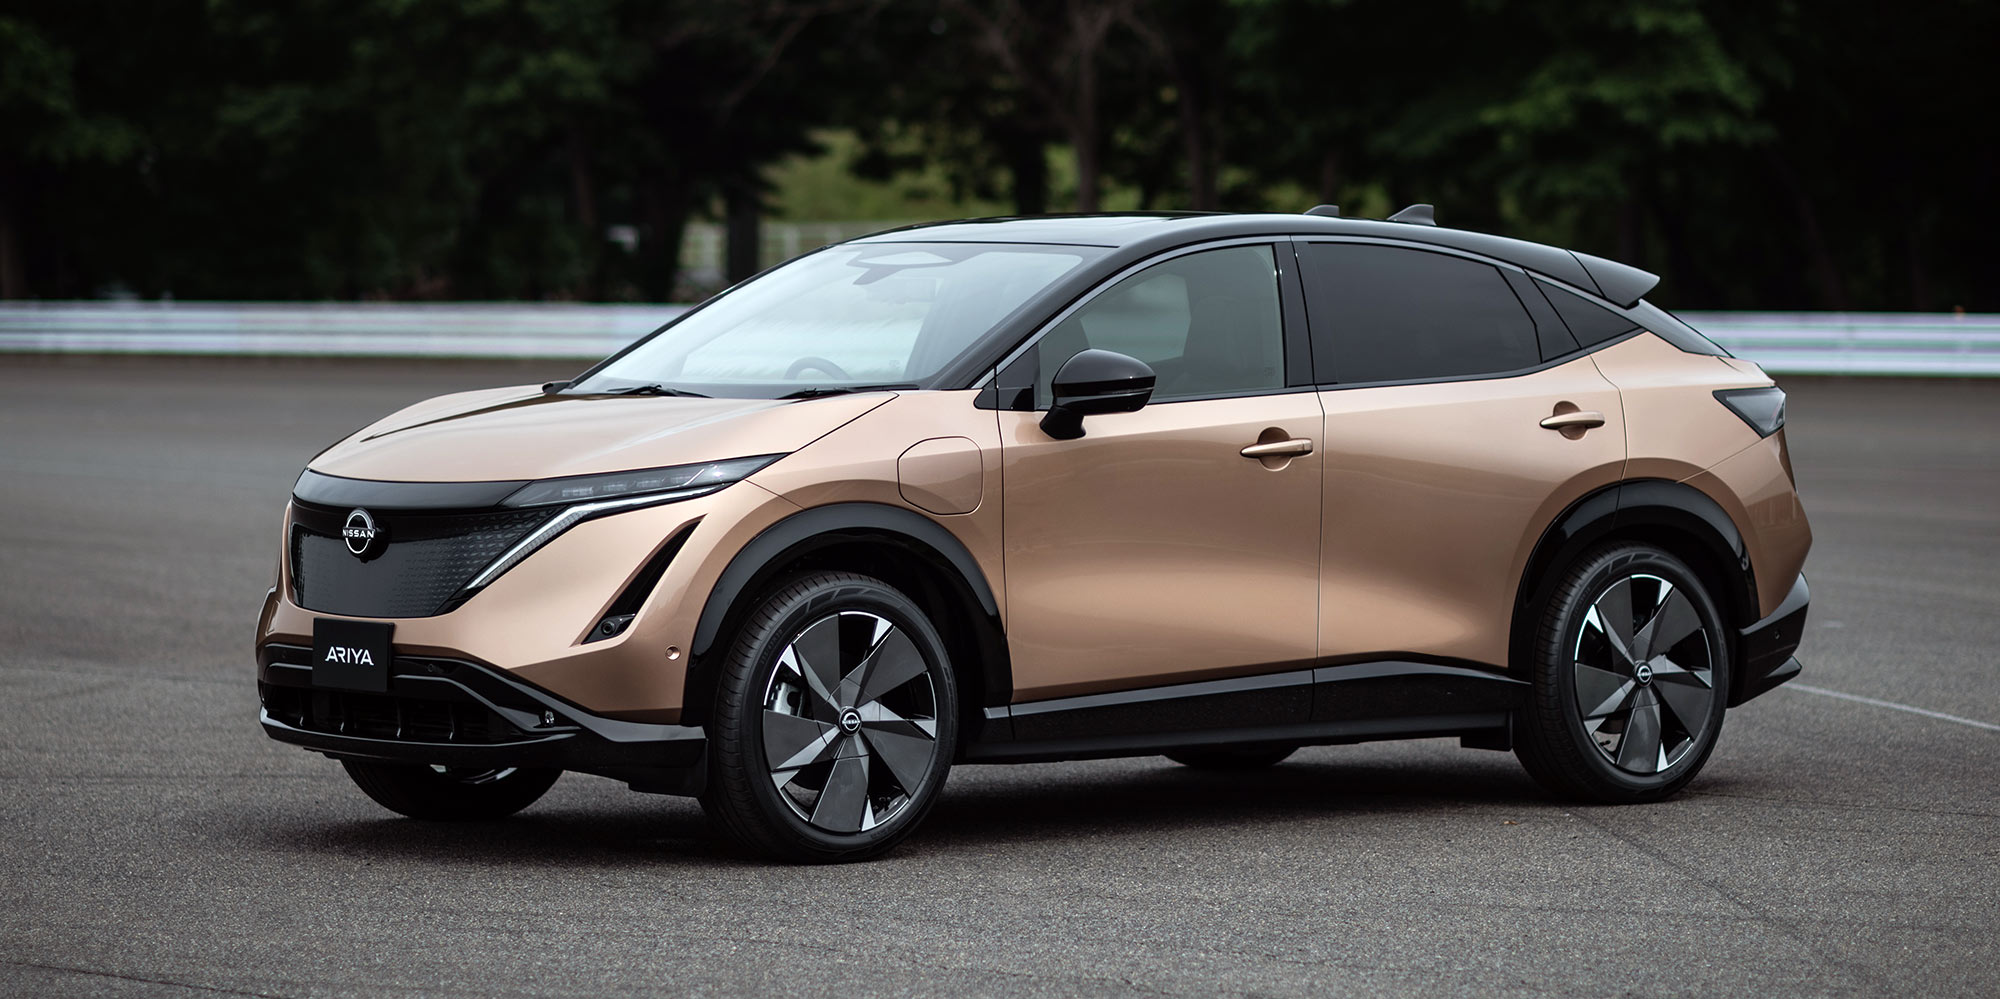 Nissan unveils 300-mile Ariya electric SUV with liquid-cooled battery